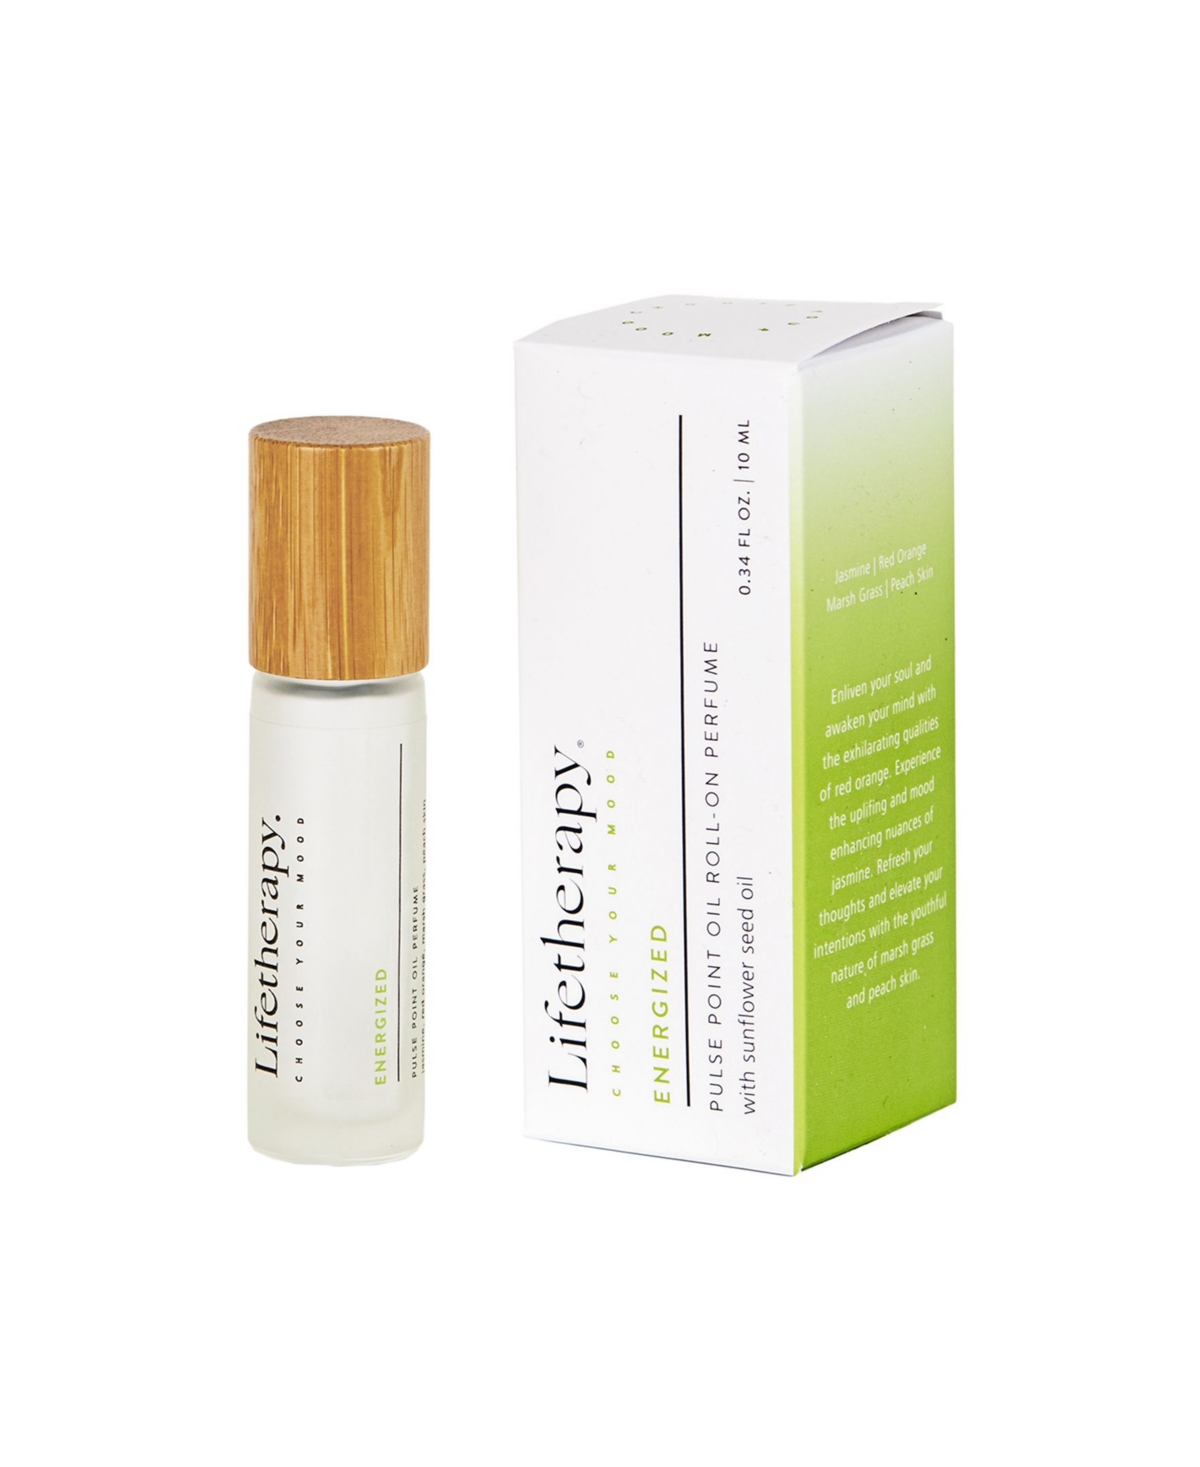 Energized Pulse Point Oil Roll-On Perfume, 0.34 oz